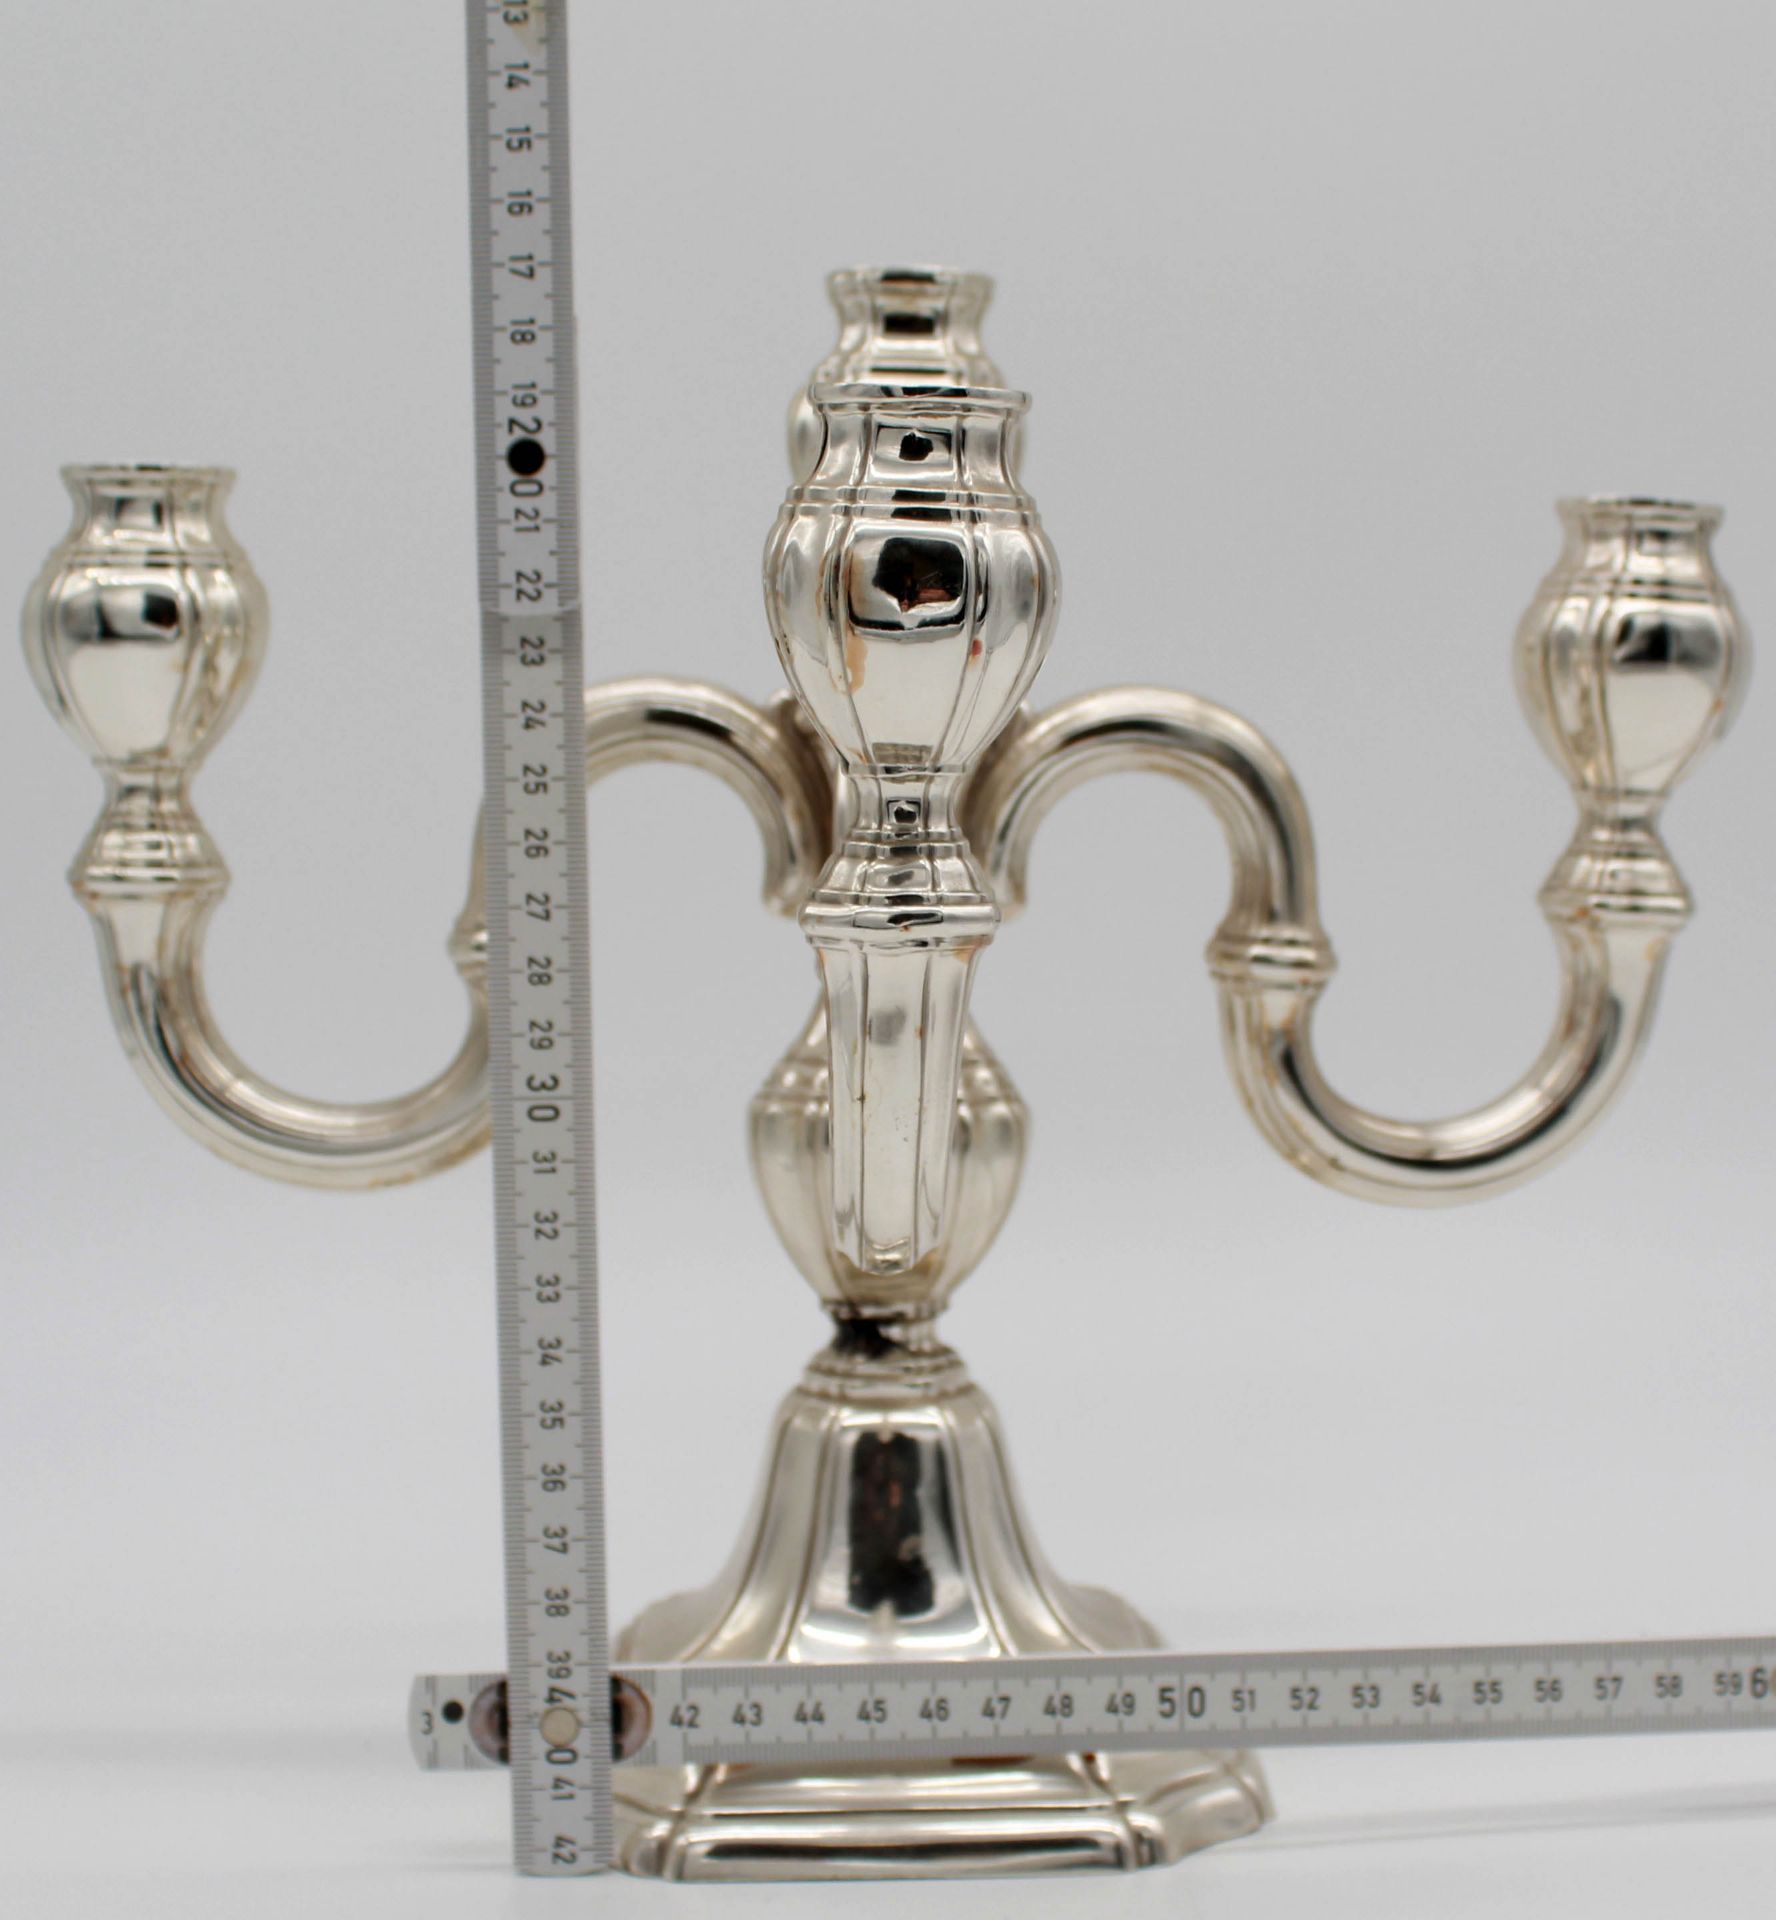 835 silver. Five-lamp candlestick. - Image 7 of 8